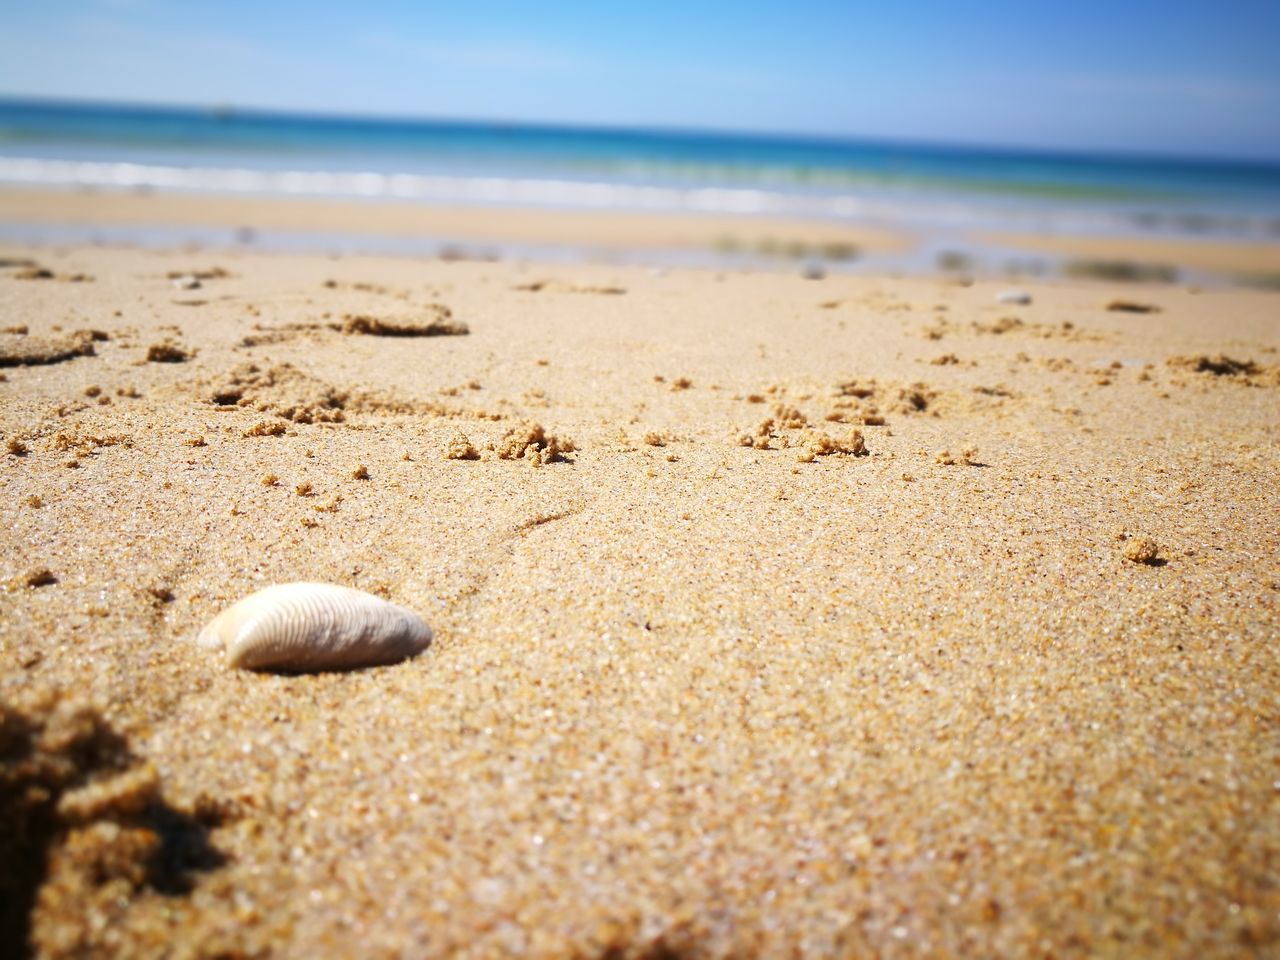 beach, land, sea, sand, water, horizon, horizon over water, beauty in nature, sky, nature, tranquility, scenics - nature, shell, day, no people, tranquil scene, selective focus, outdoors, sunlight, surface level